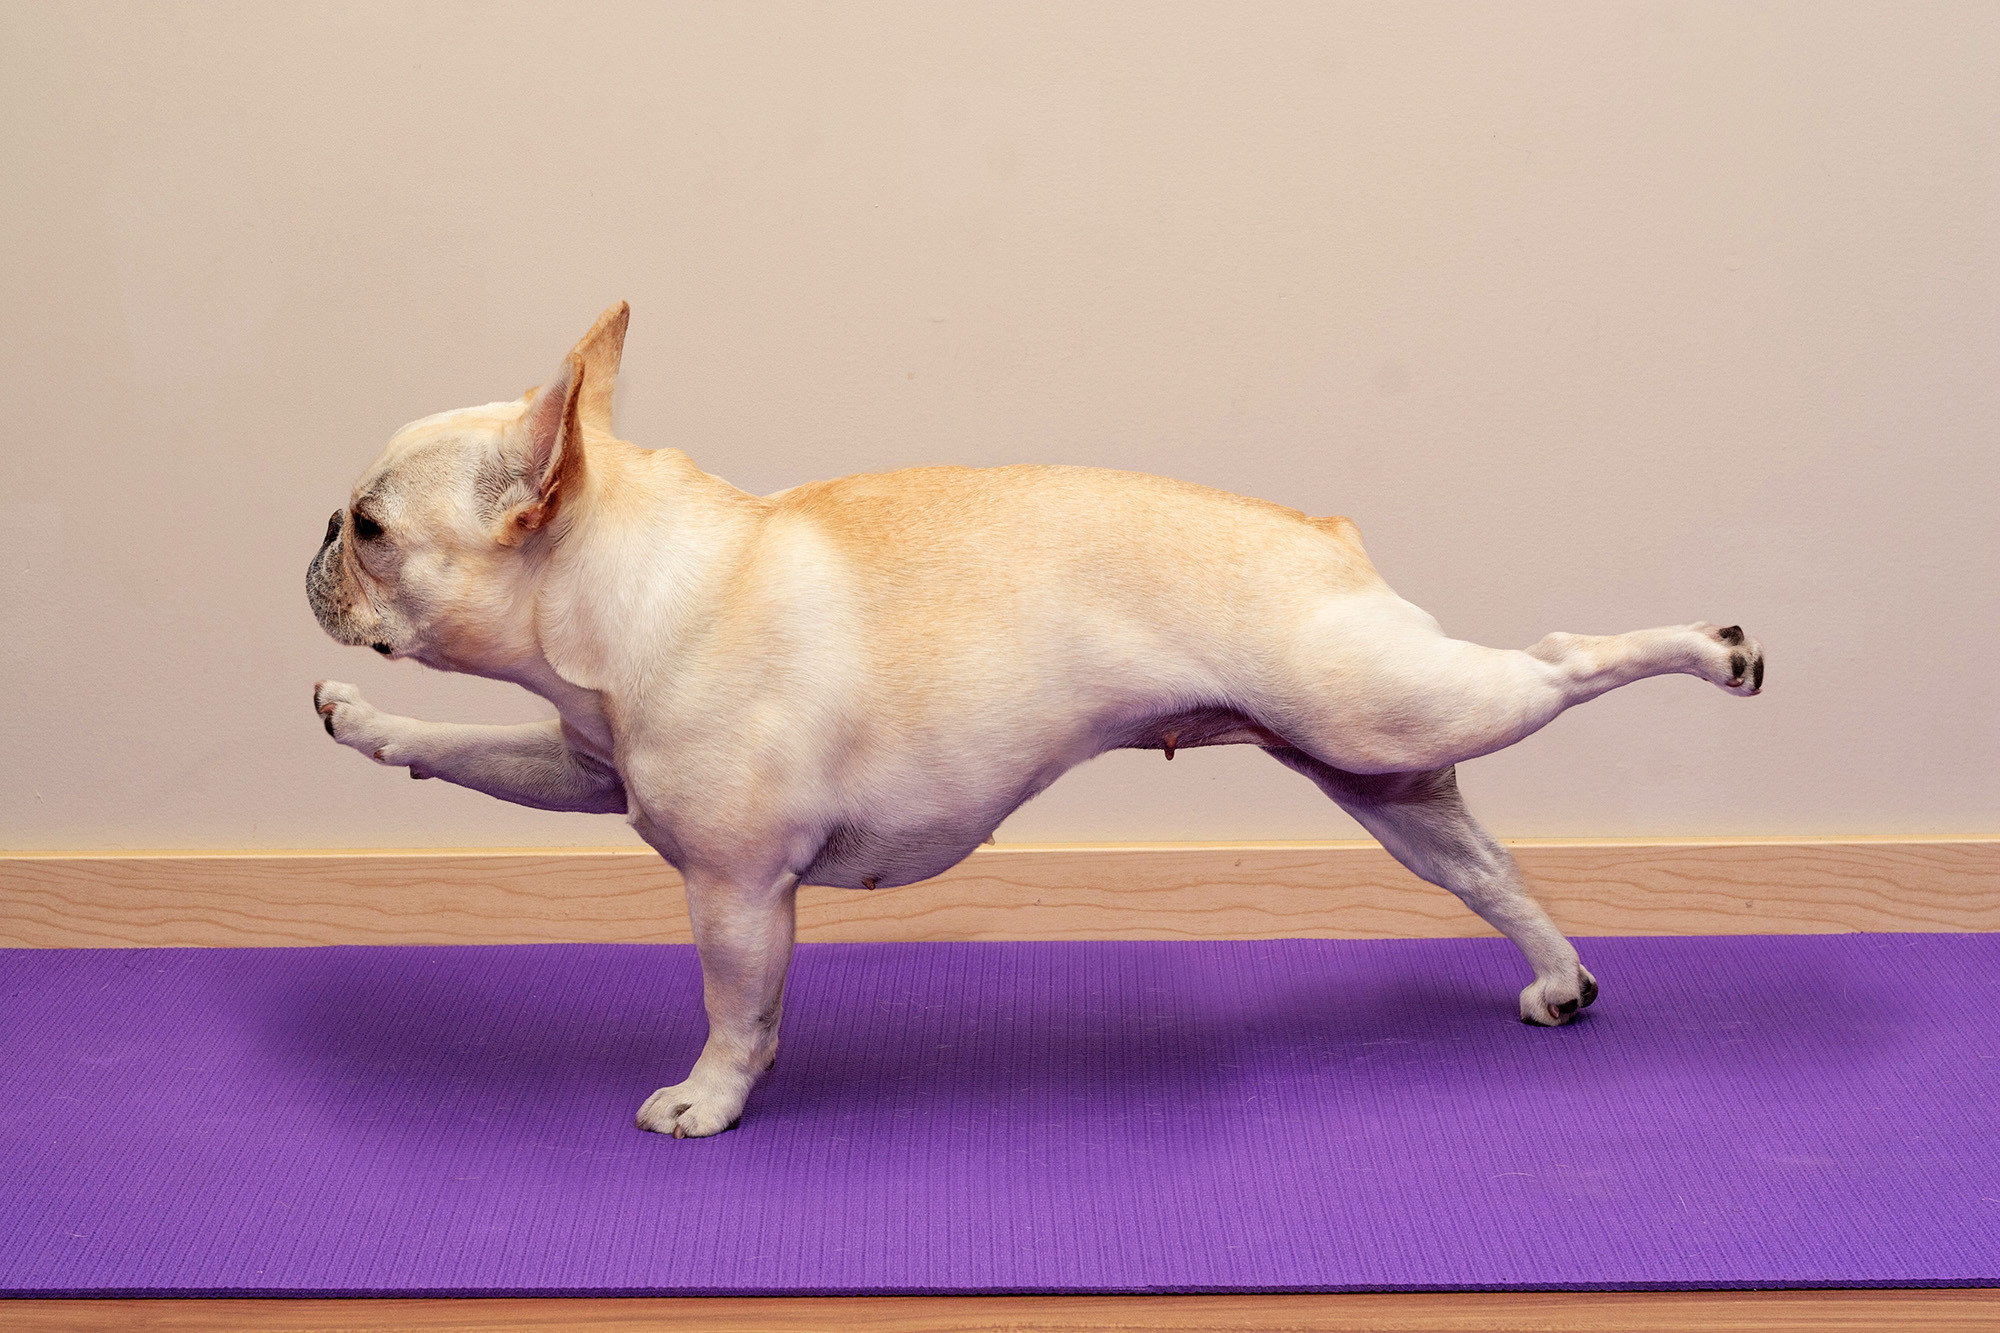 Dog yoga is apparently a thing now